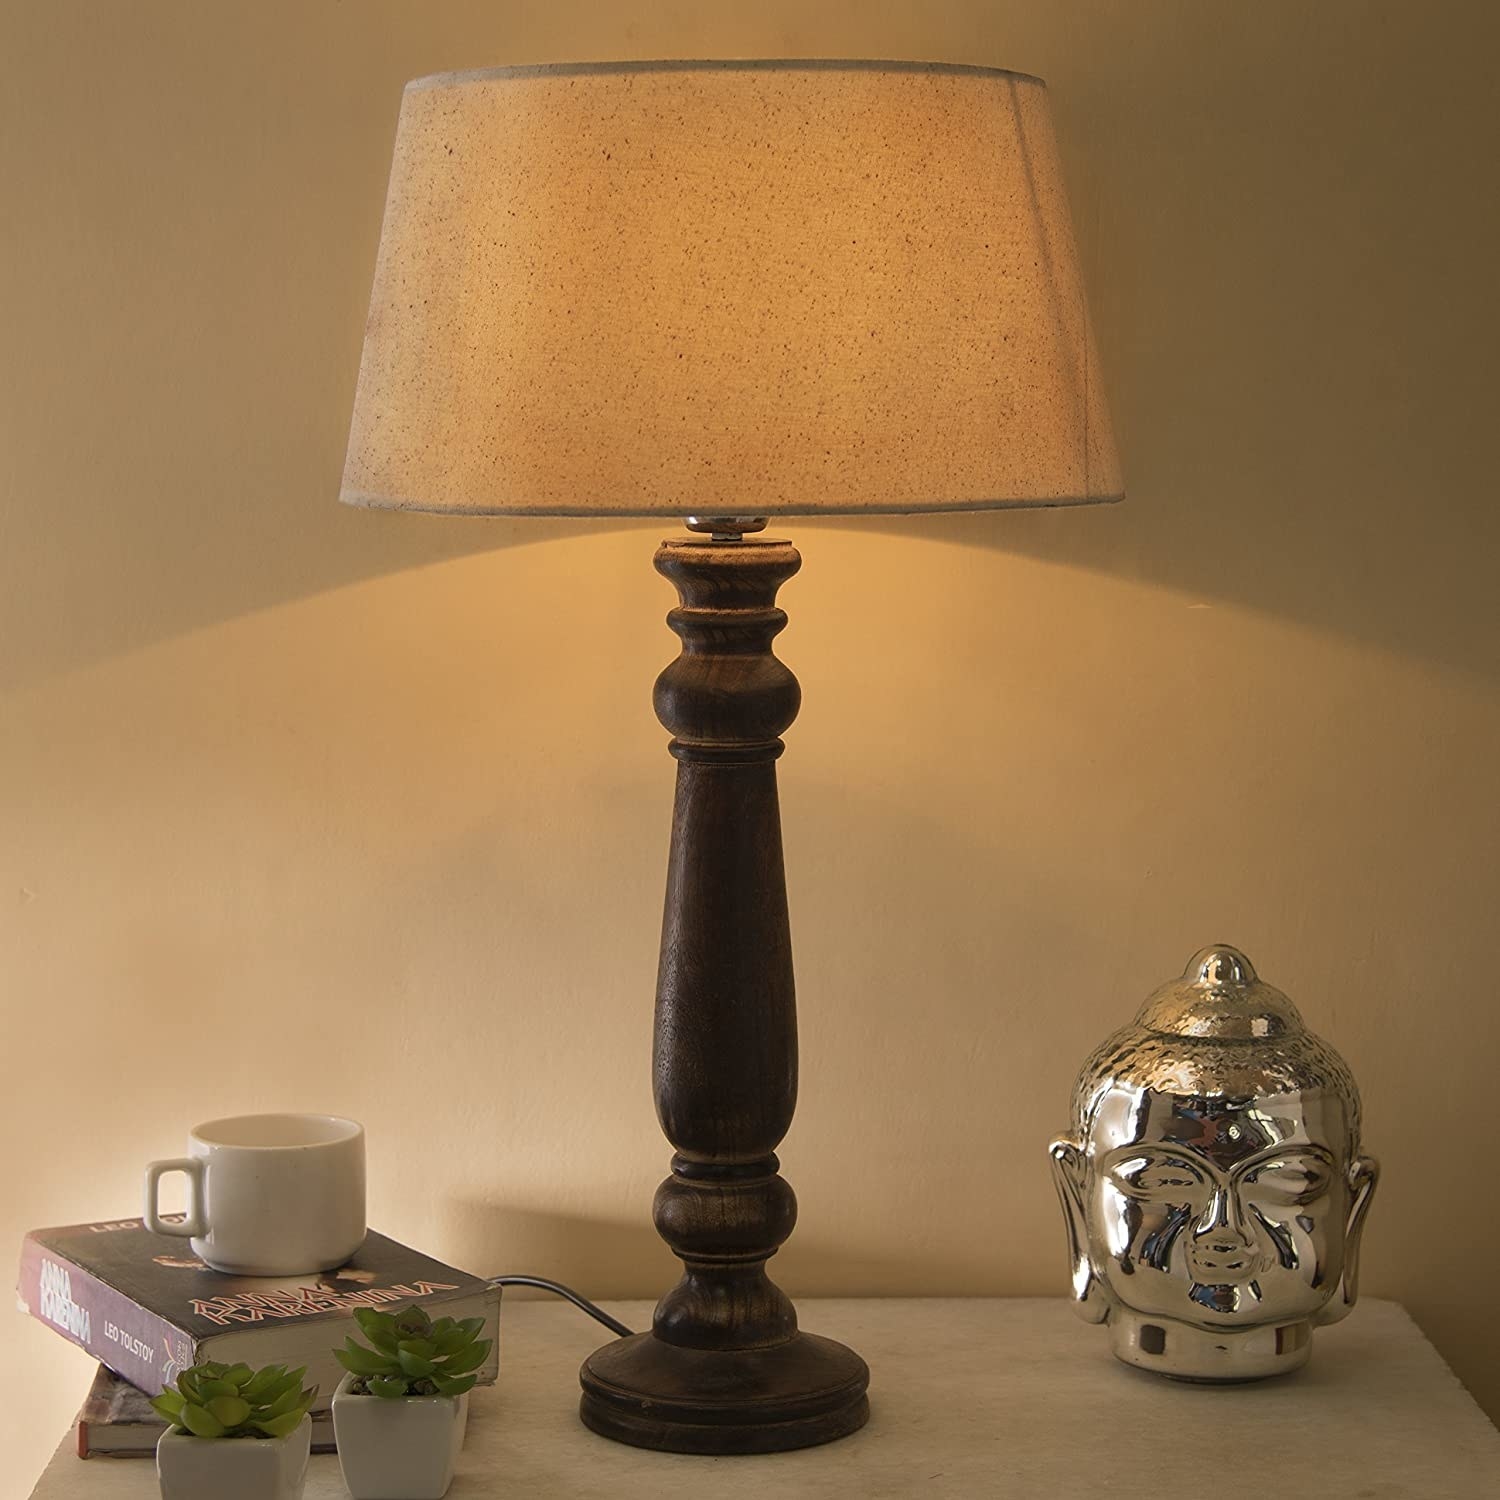 A table lamp on a table 